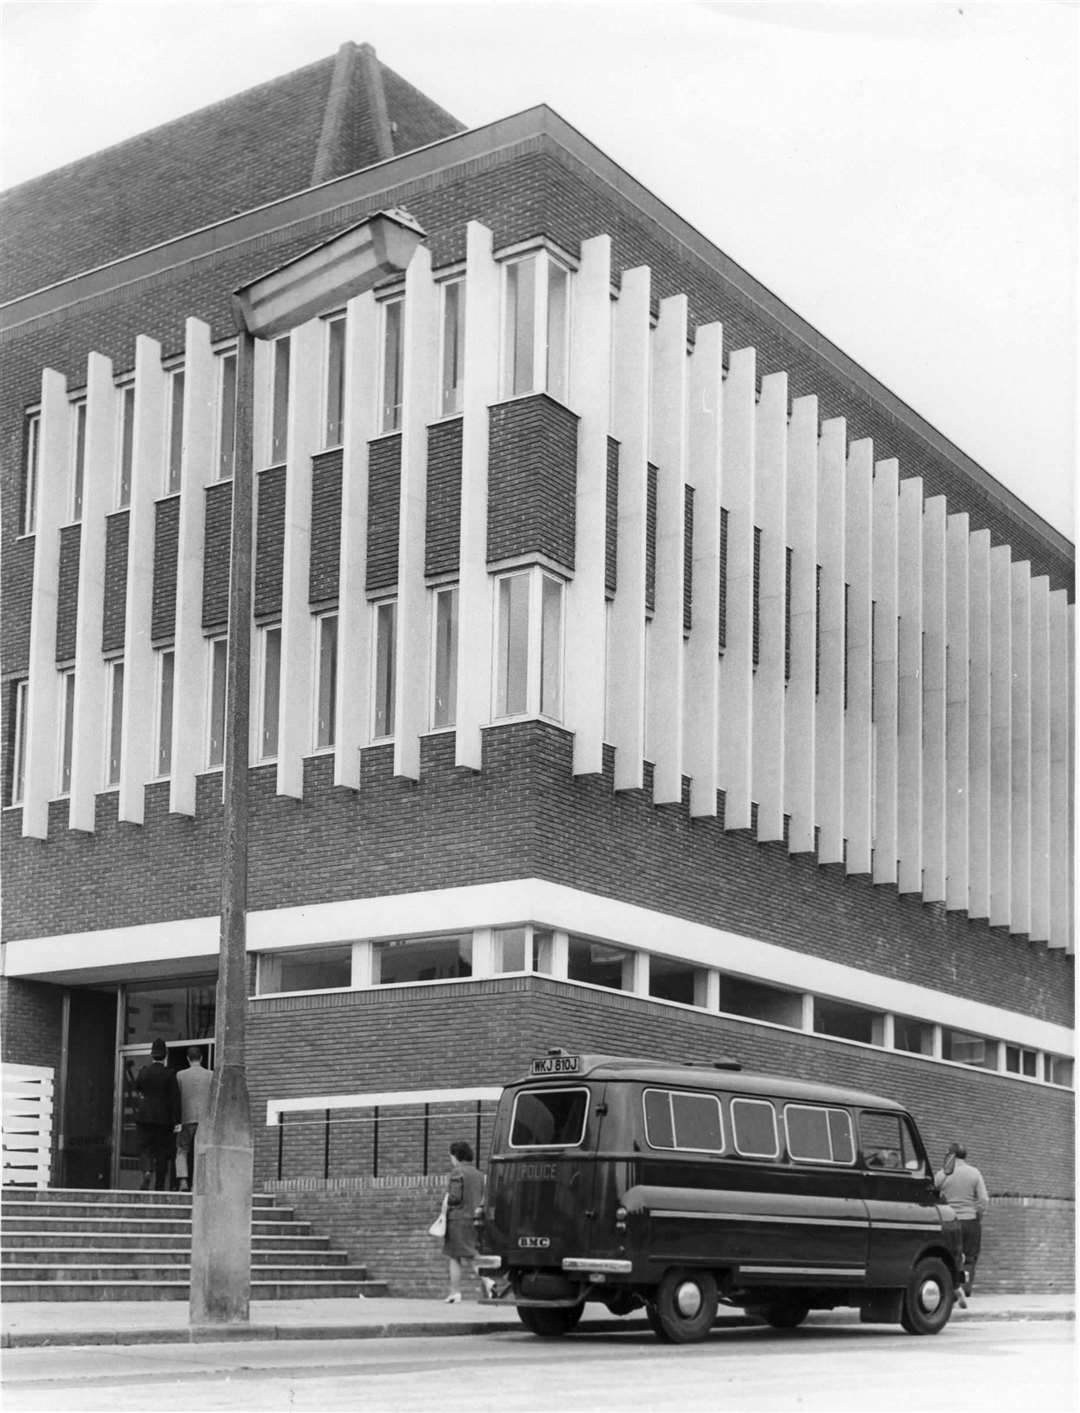 The police station and court houses in Margate in August 1972